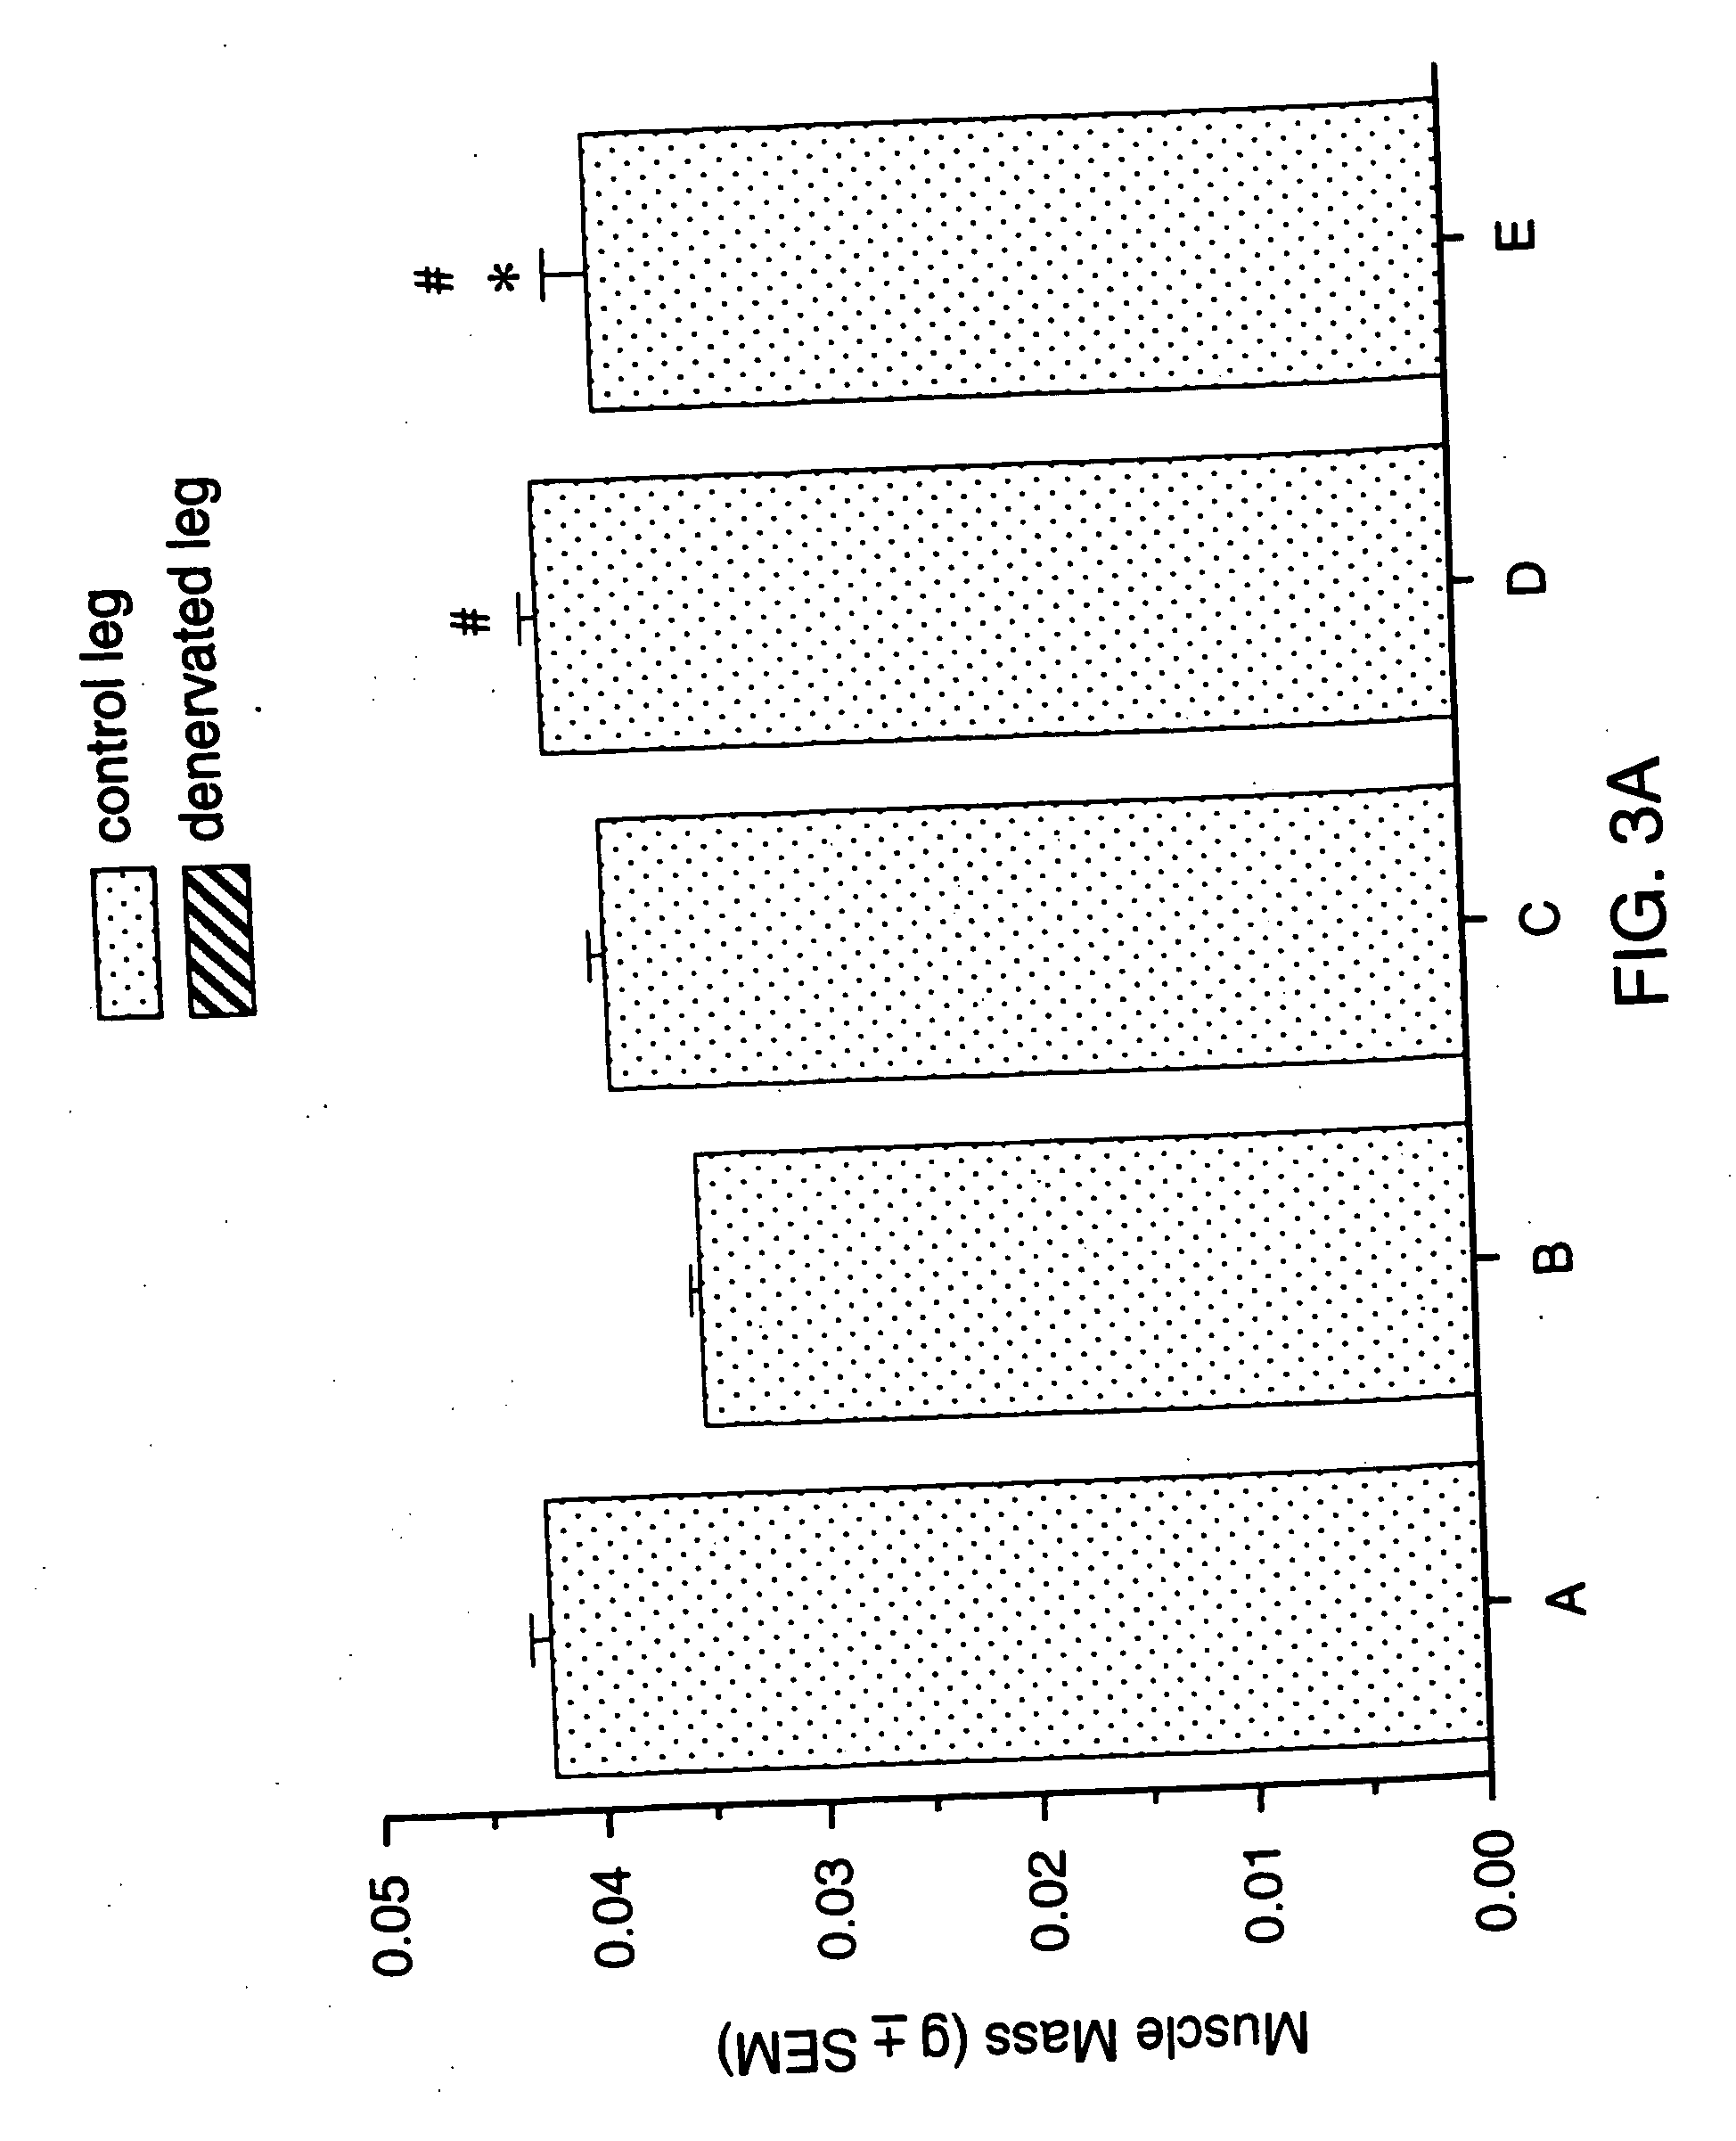 Methods for identifying compounds for regulating muscle mass or function using corticotropin releasing factor receptors